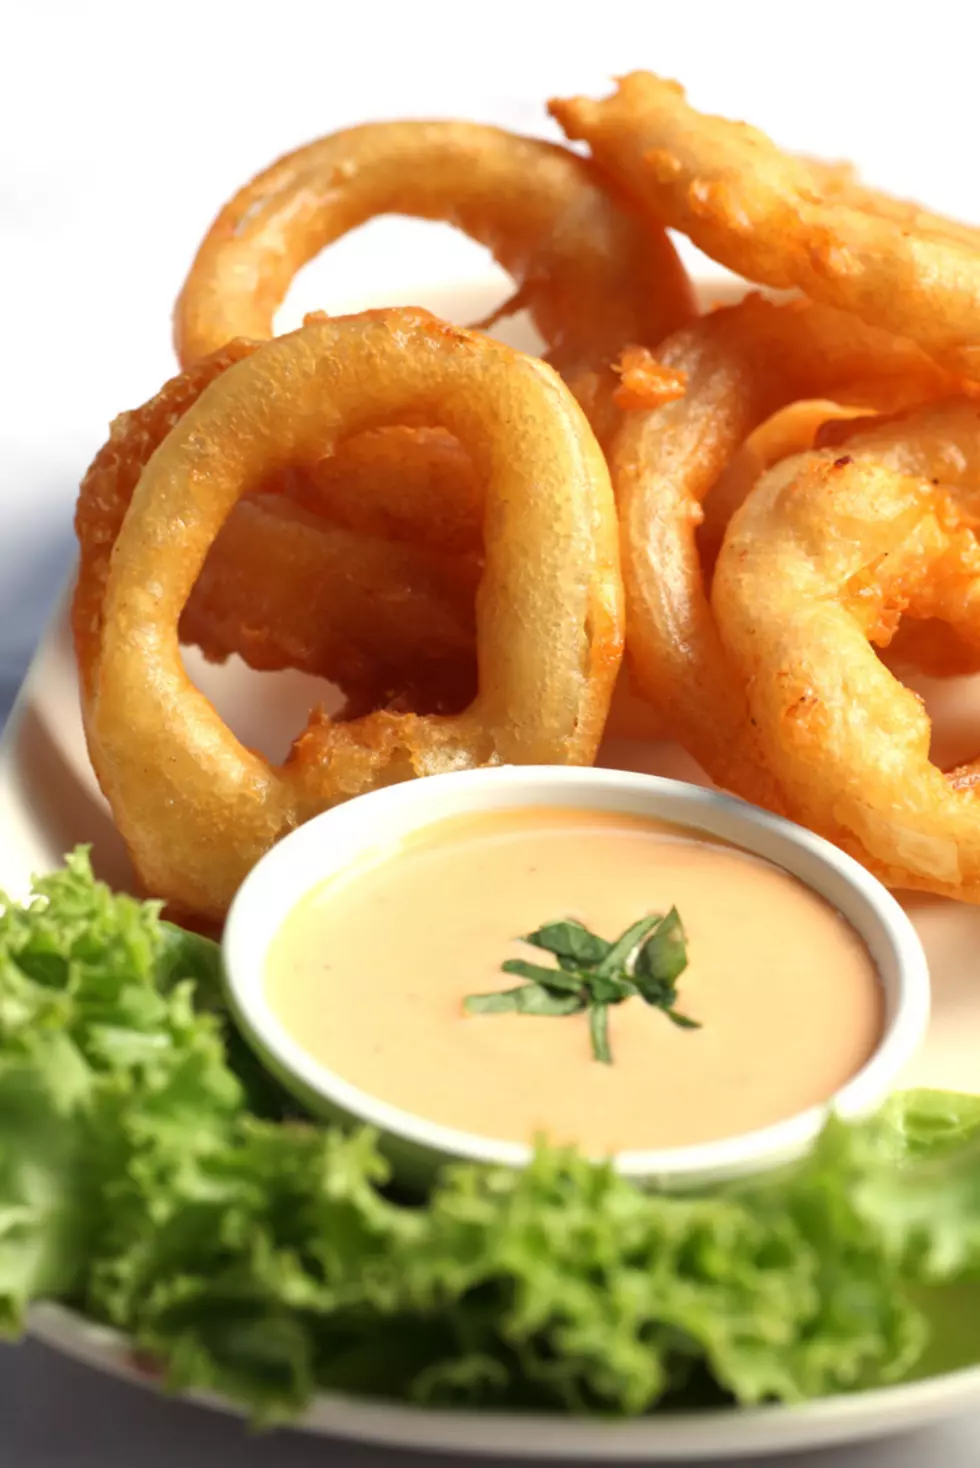 Was the Onion Ring First Made in New York?